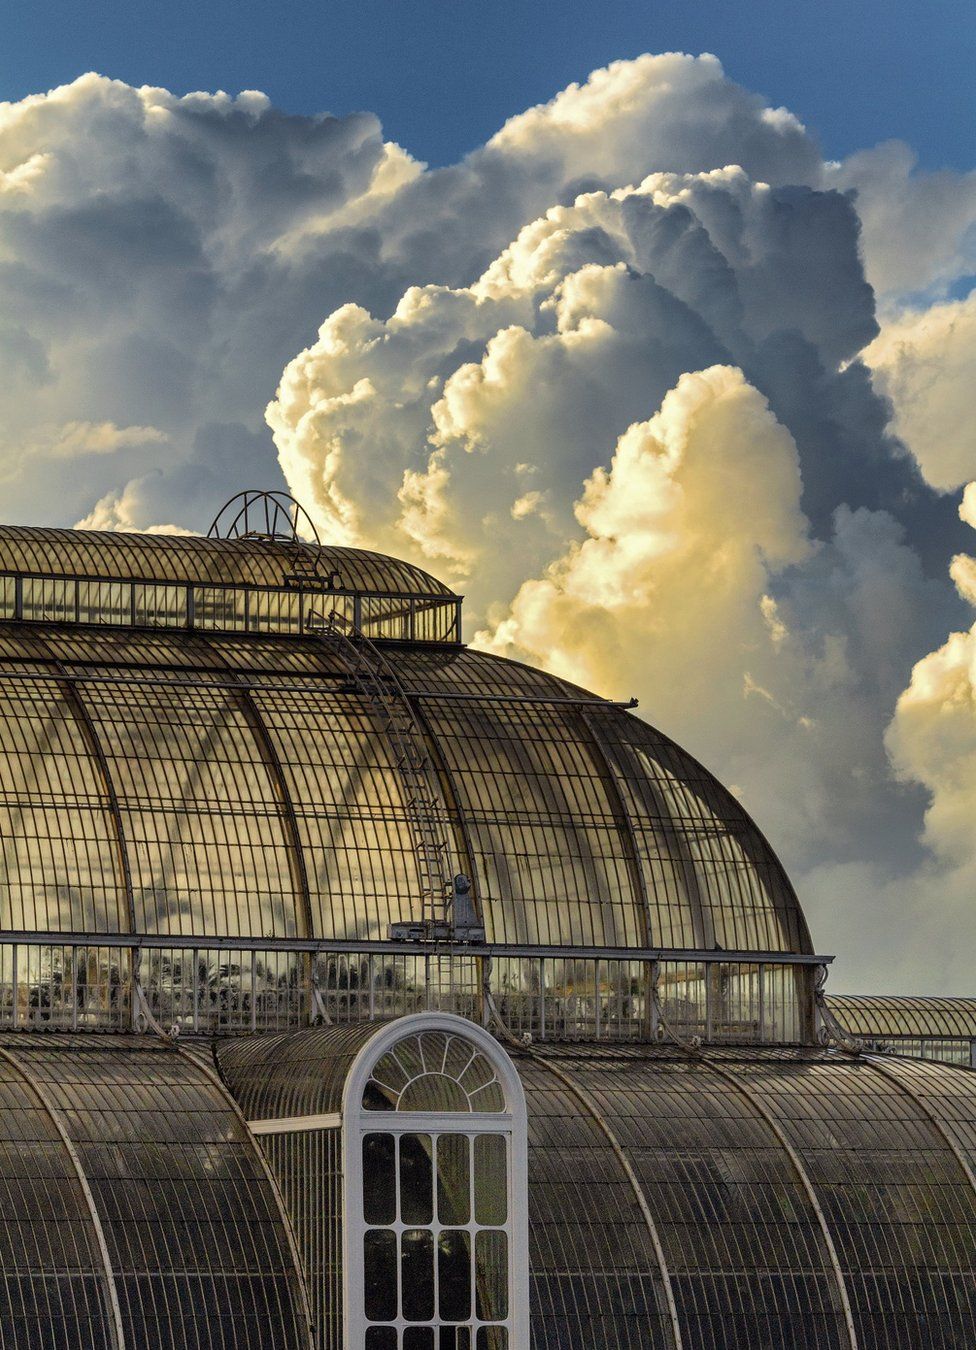 A very large greenhouse with the sky behind it